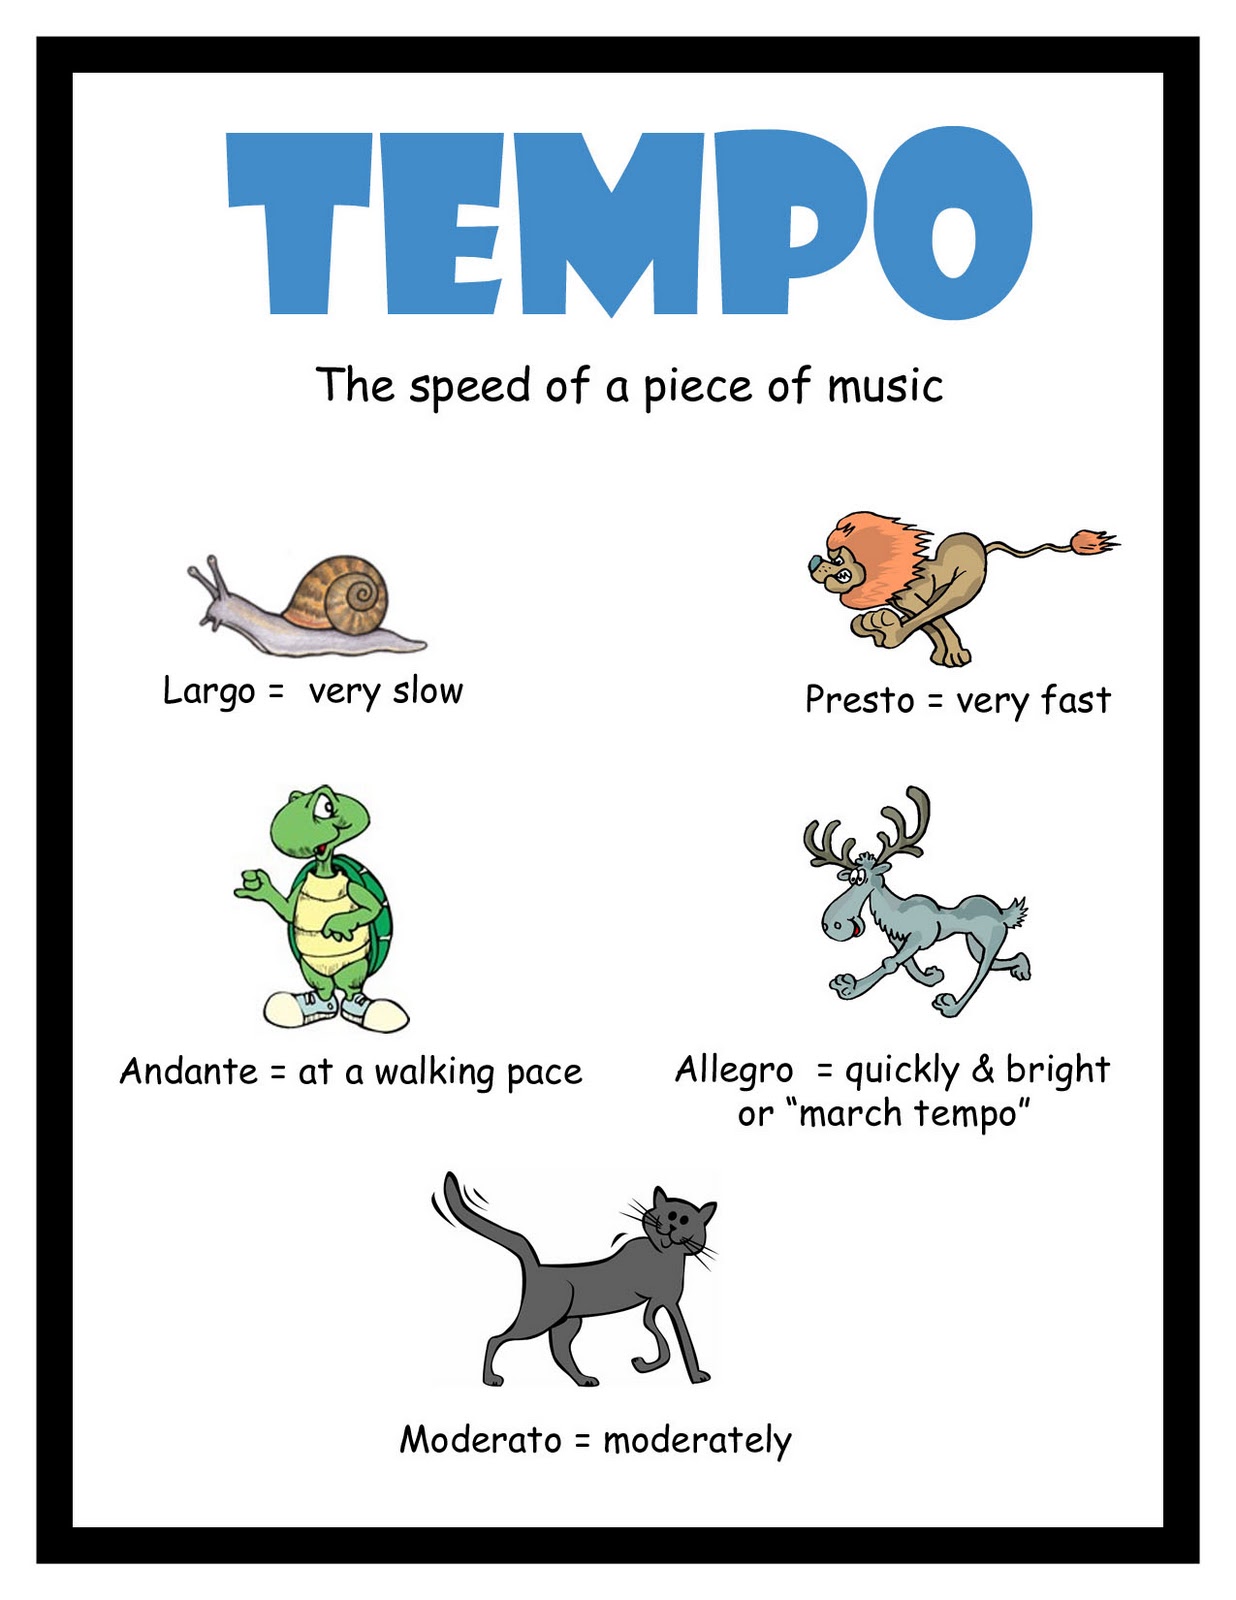 introduction-to-some-basic-musical-terms-for-tempo-with-images